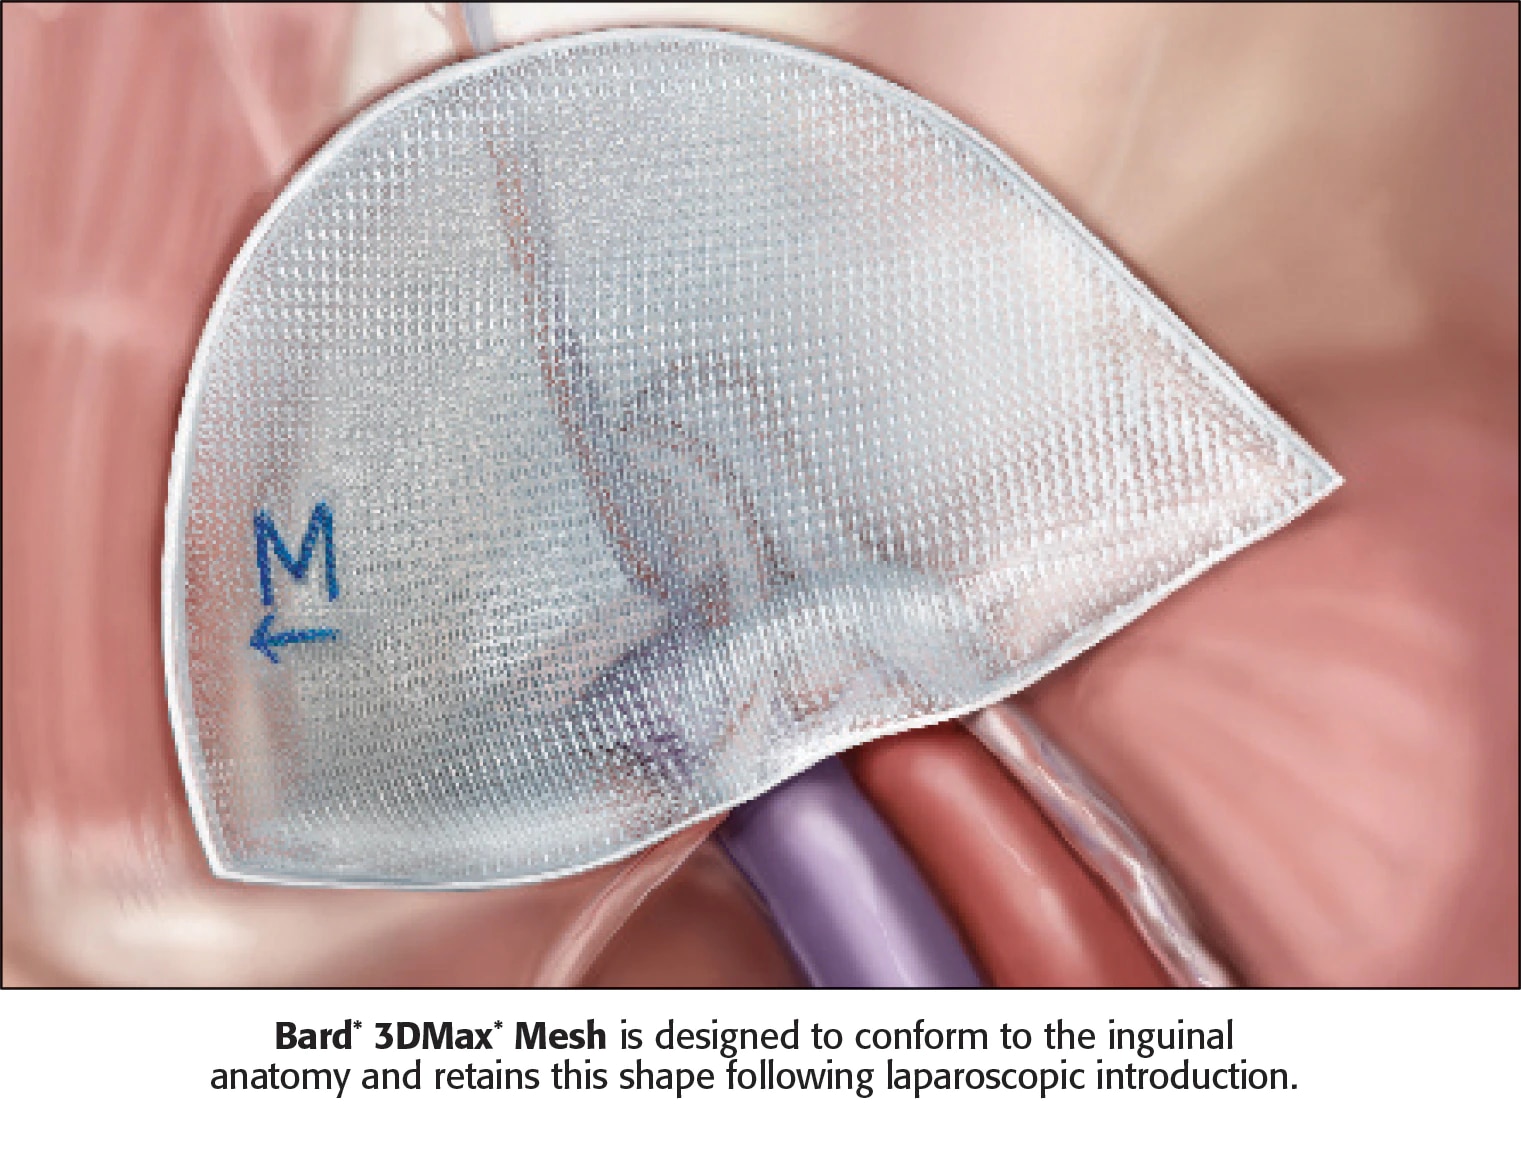 Types and Characteristics of the Mesh